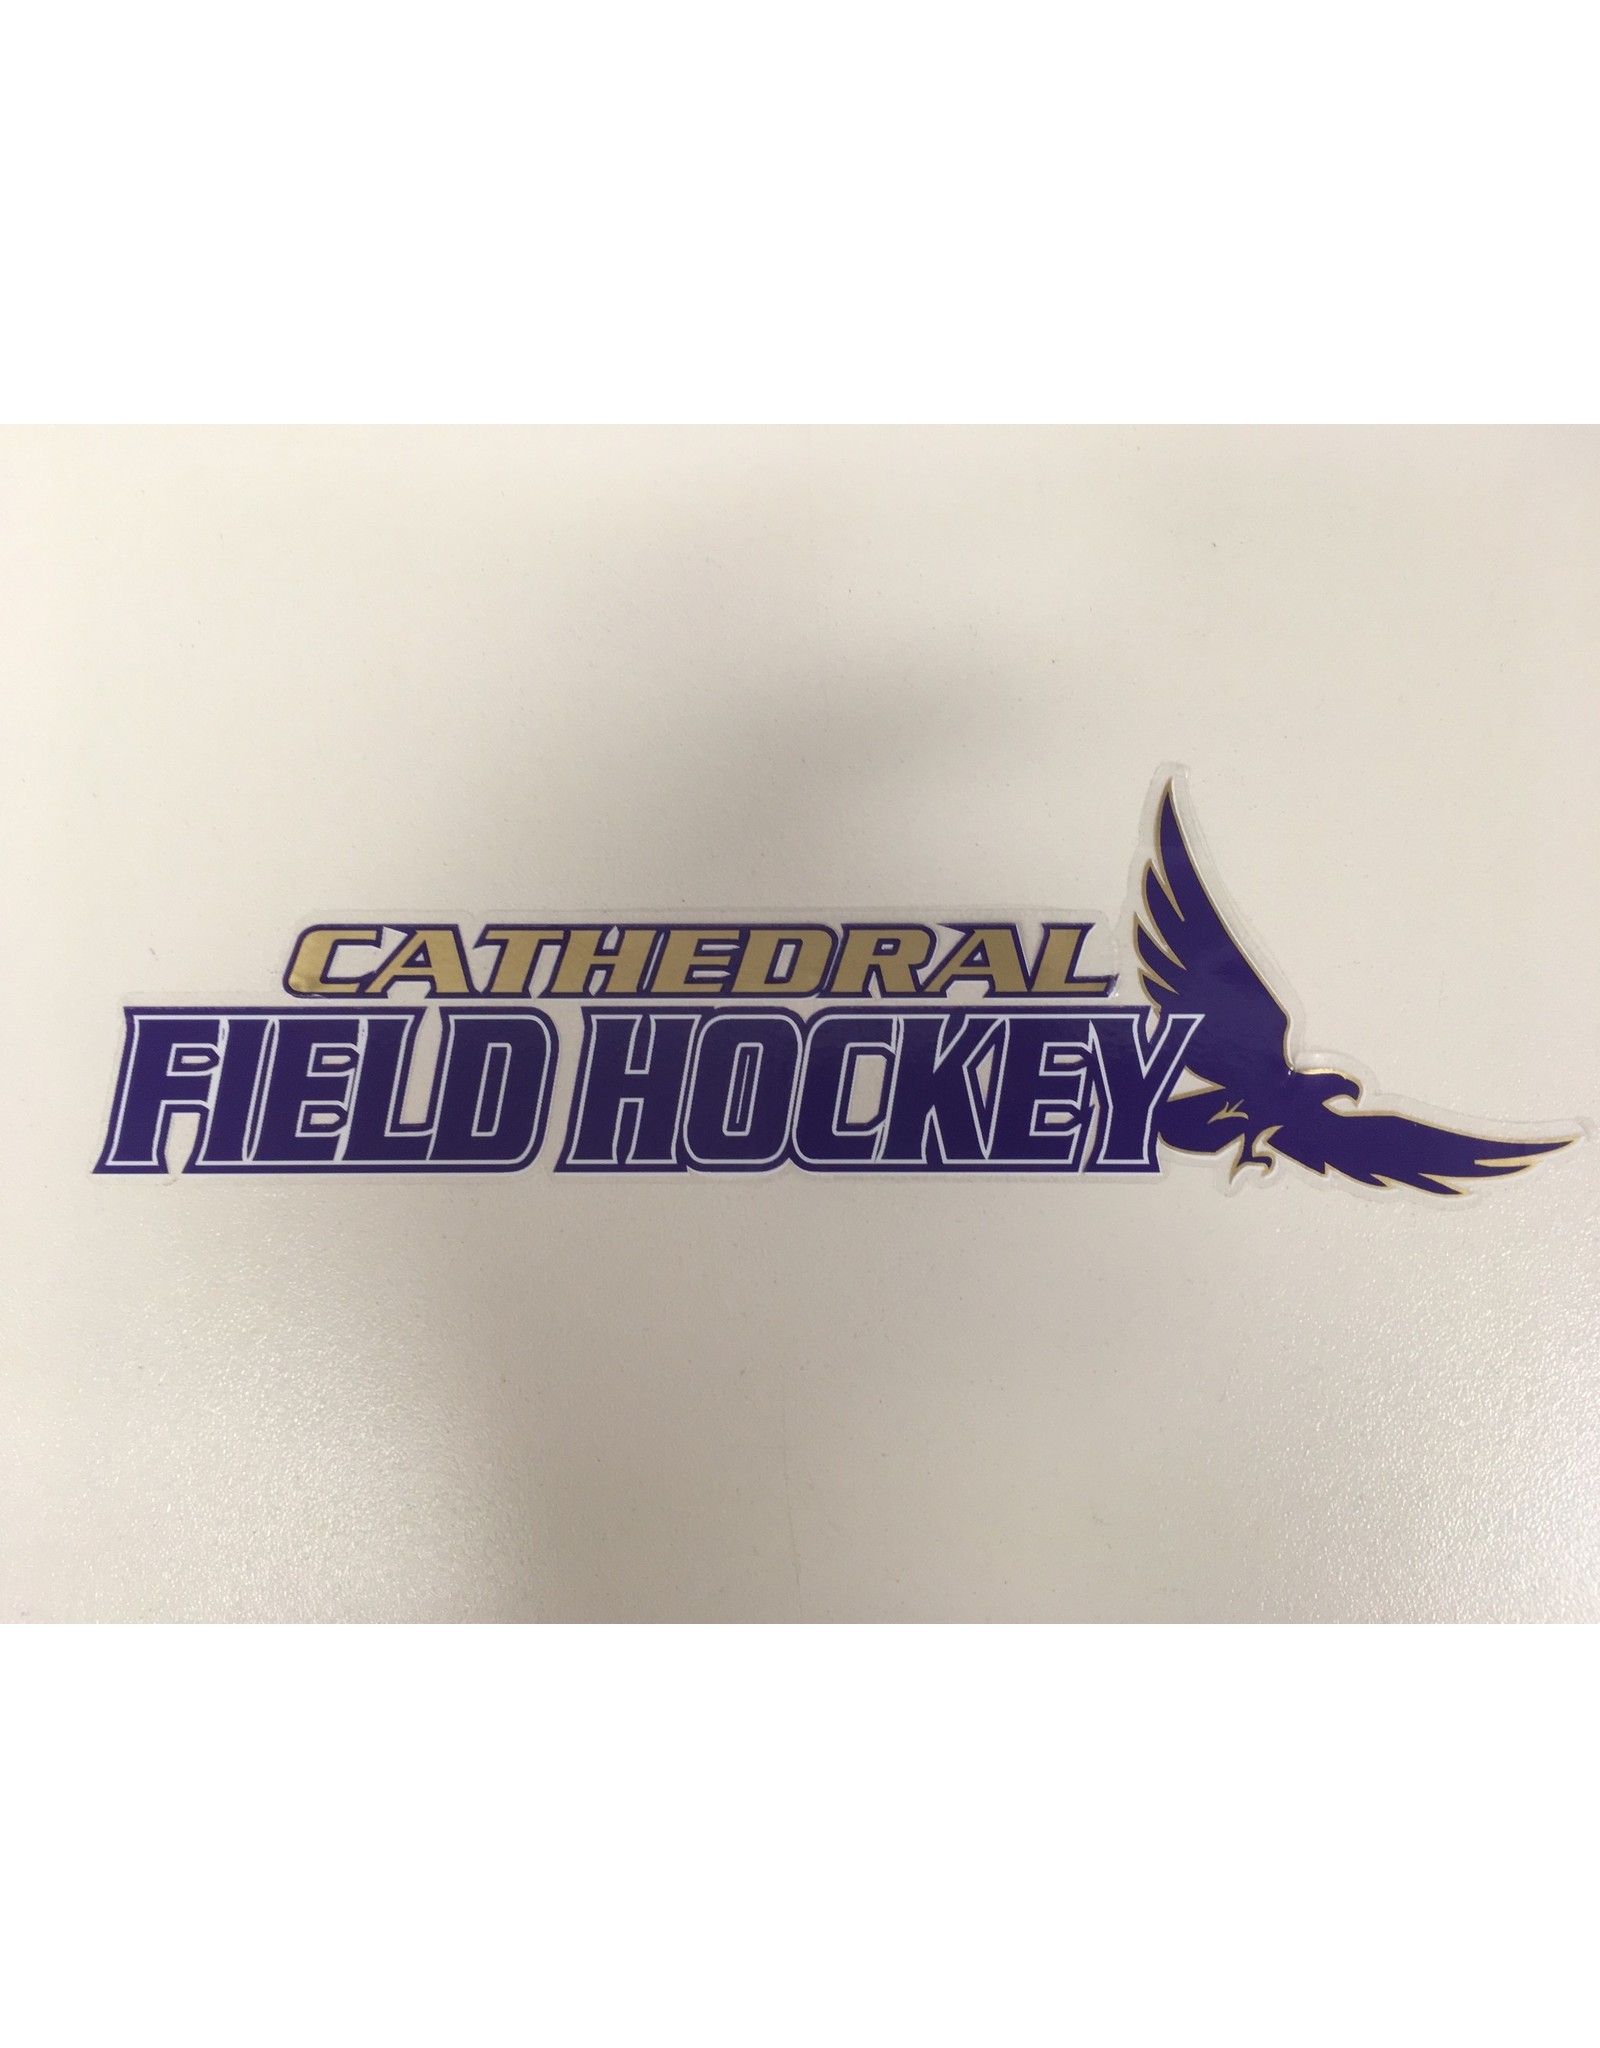 DECAL-CATHEDRAL SPORTS